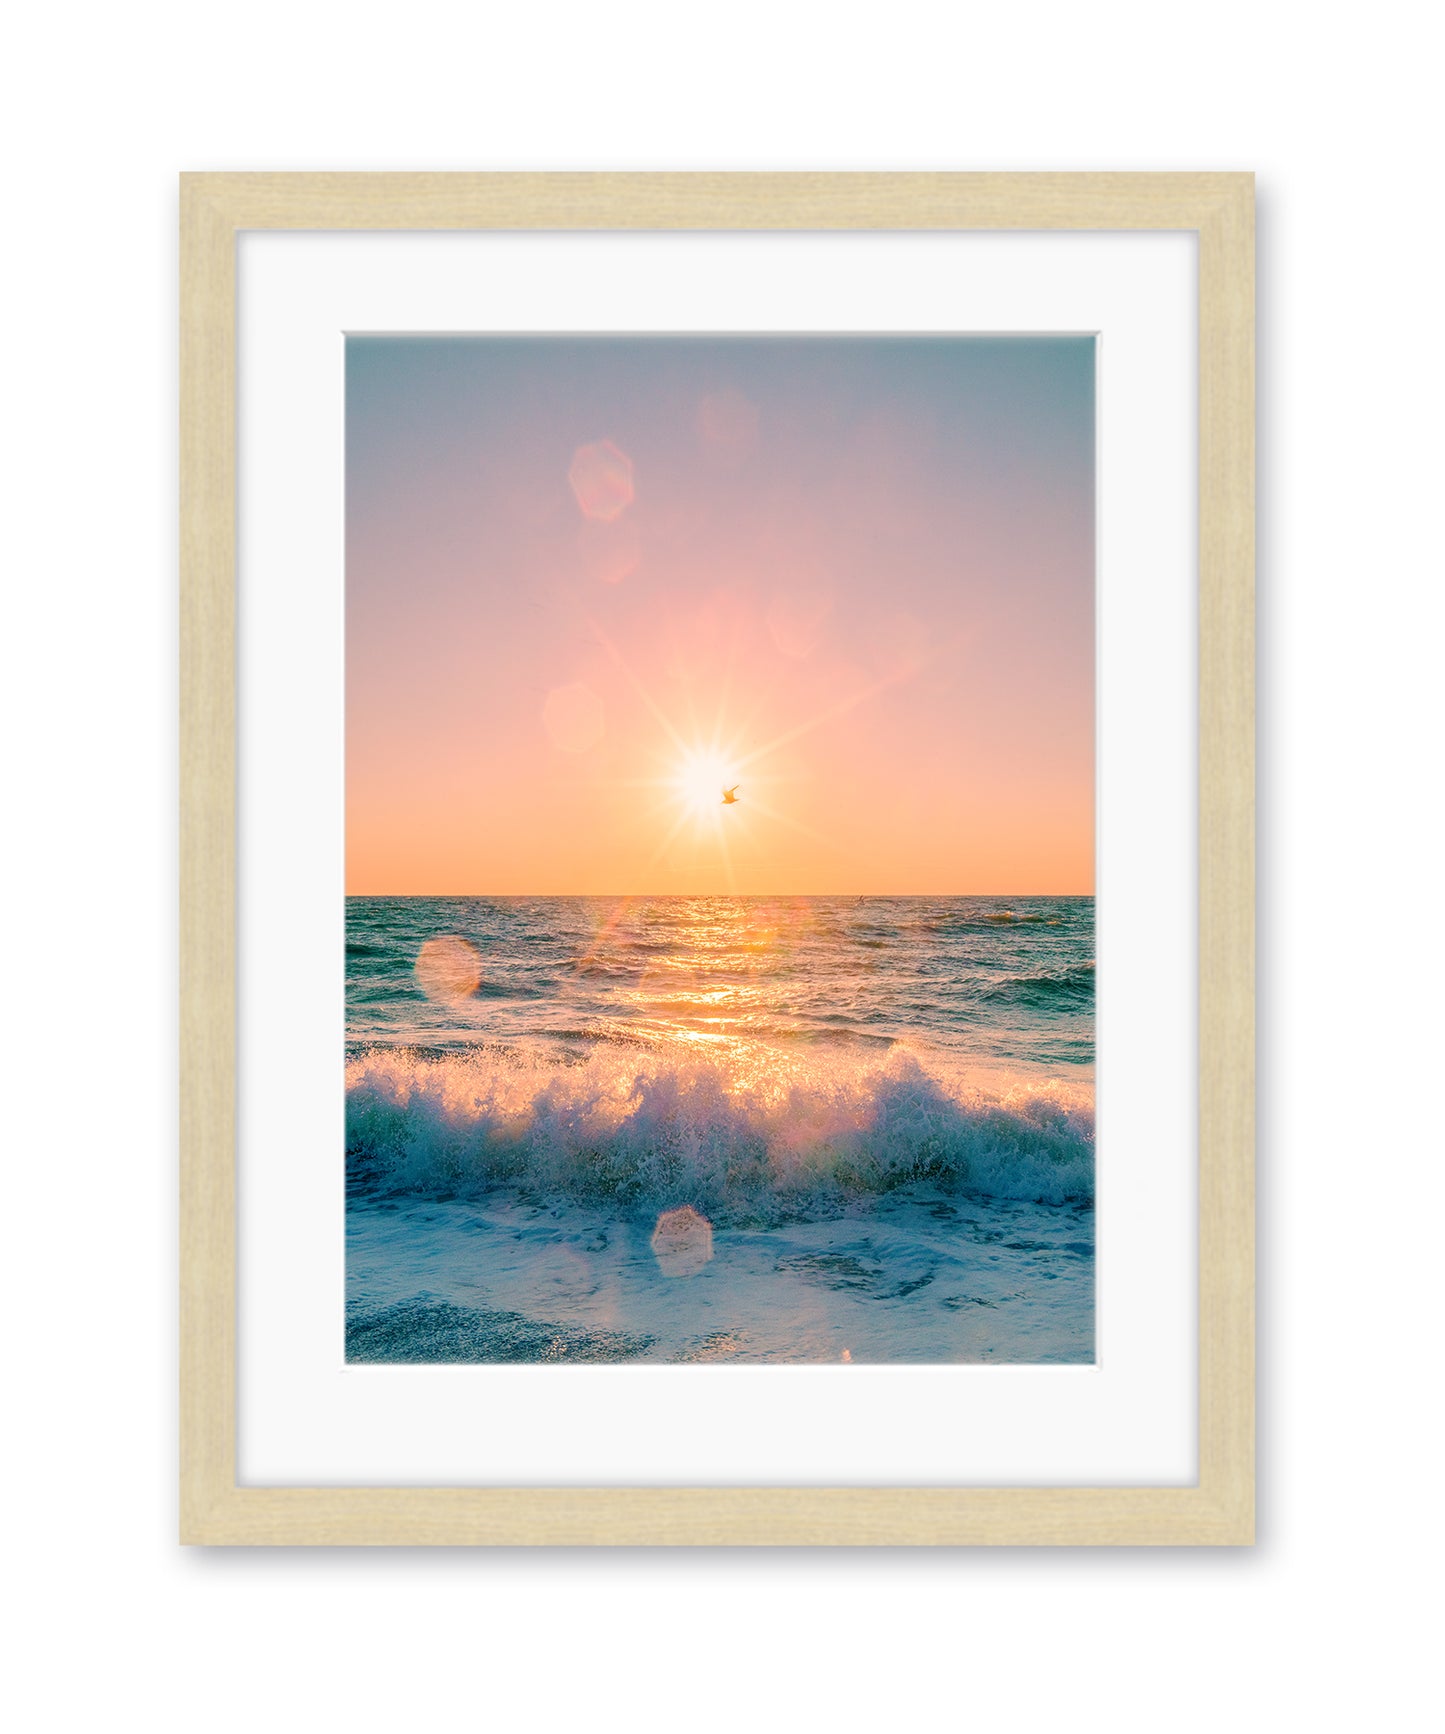 colorful sunflare beach photograph wood frame